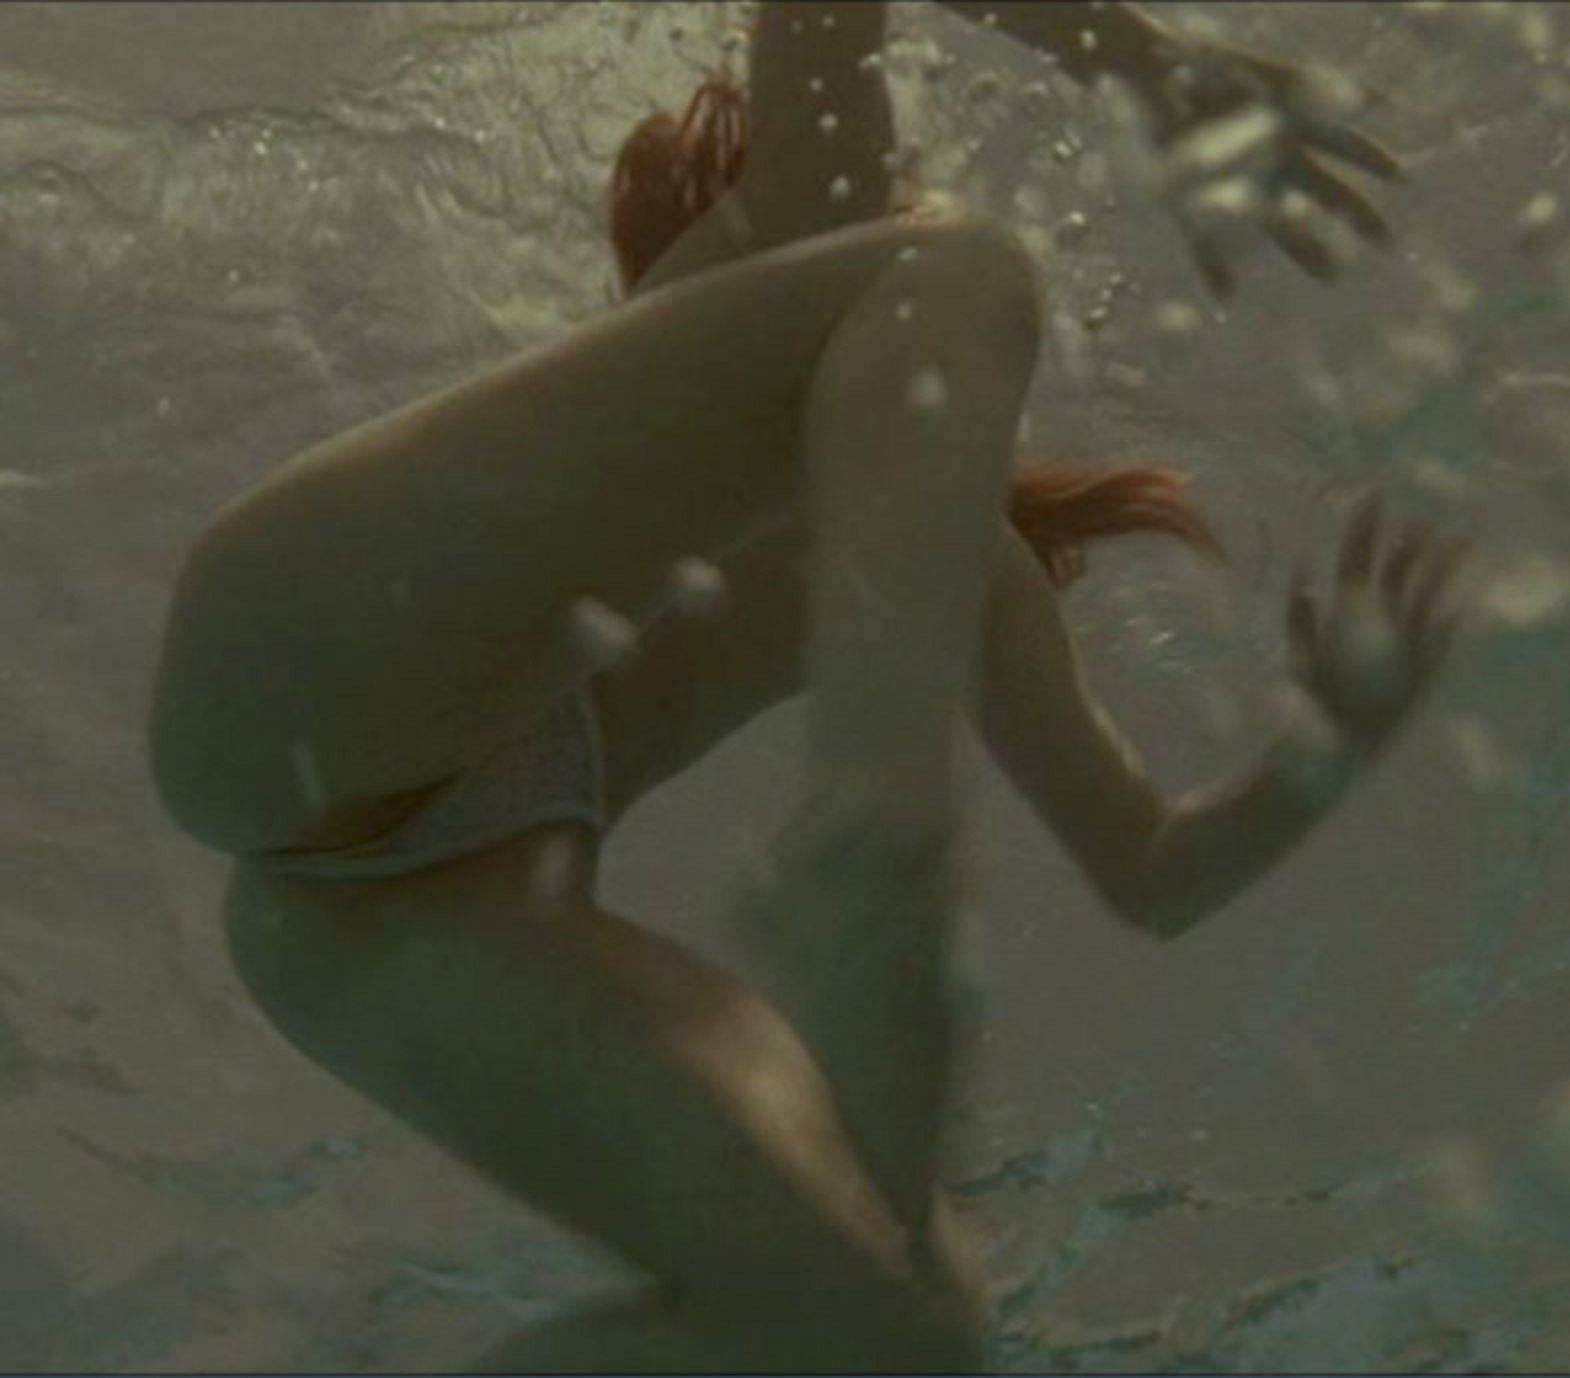 Sexy Beauty Erica Durance Shows Her Ass and Crotch While Underwater